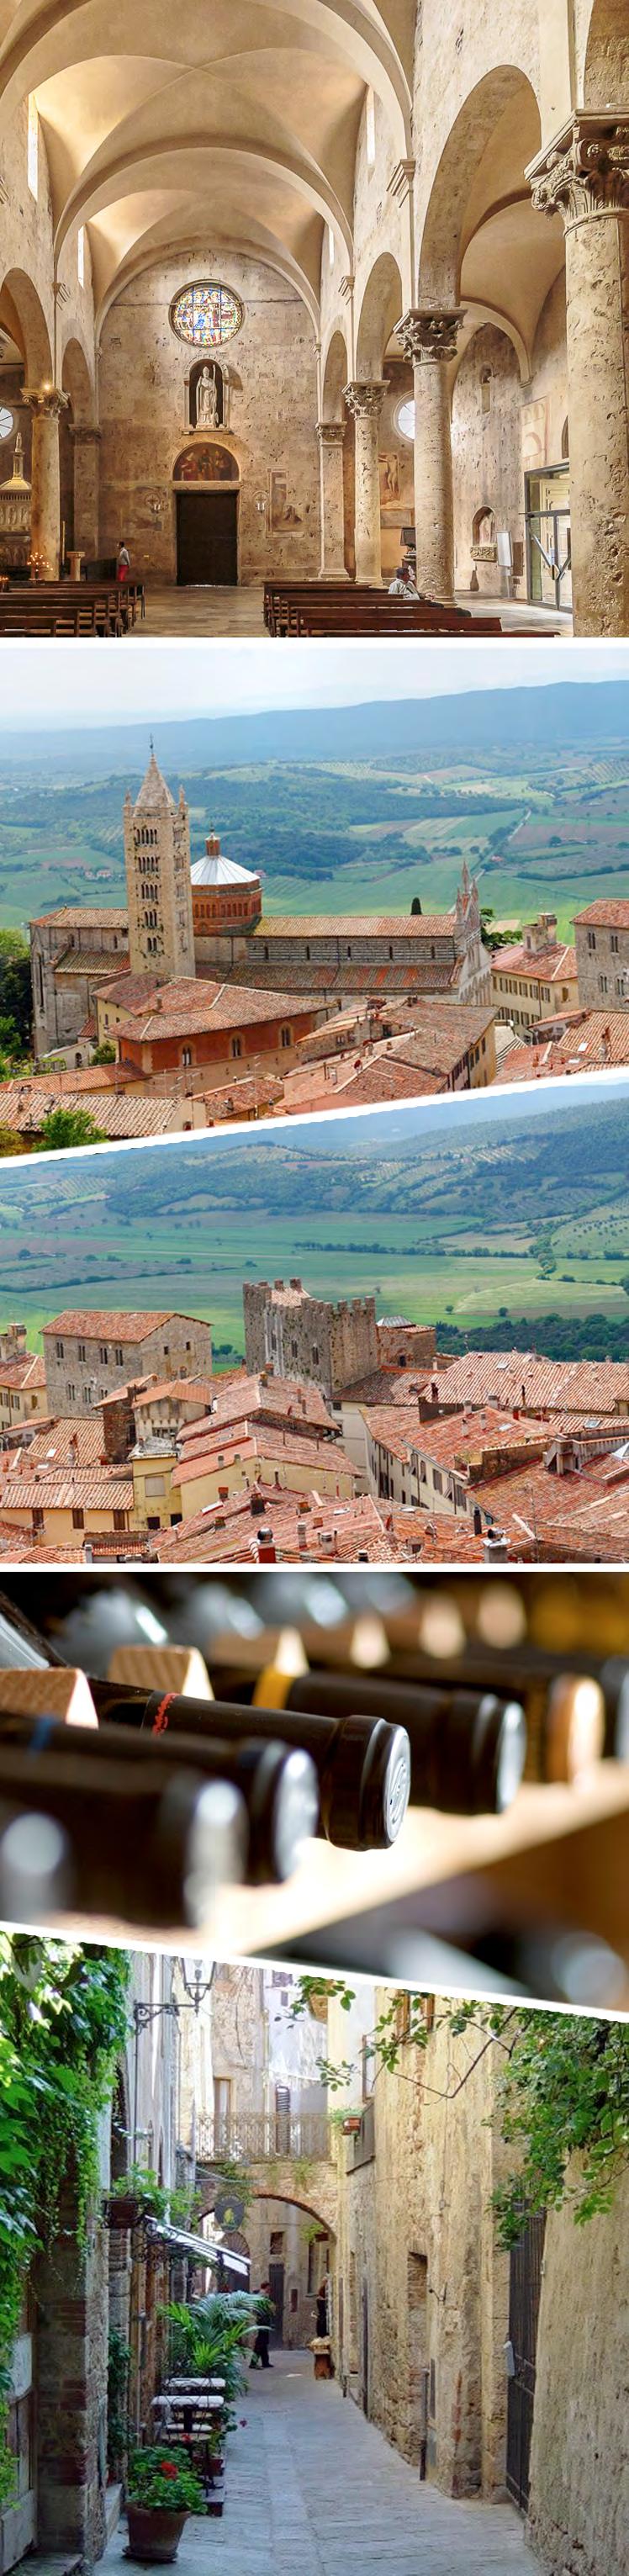 FLAVOURS & CULTURE Massa Marittima The tradition of good taste and flavor is born in beautiful places: discover it means crossing vineyards and beautiful scenery, along the charming streets, linger